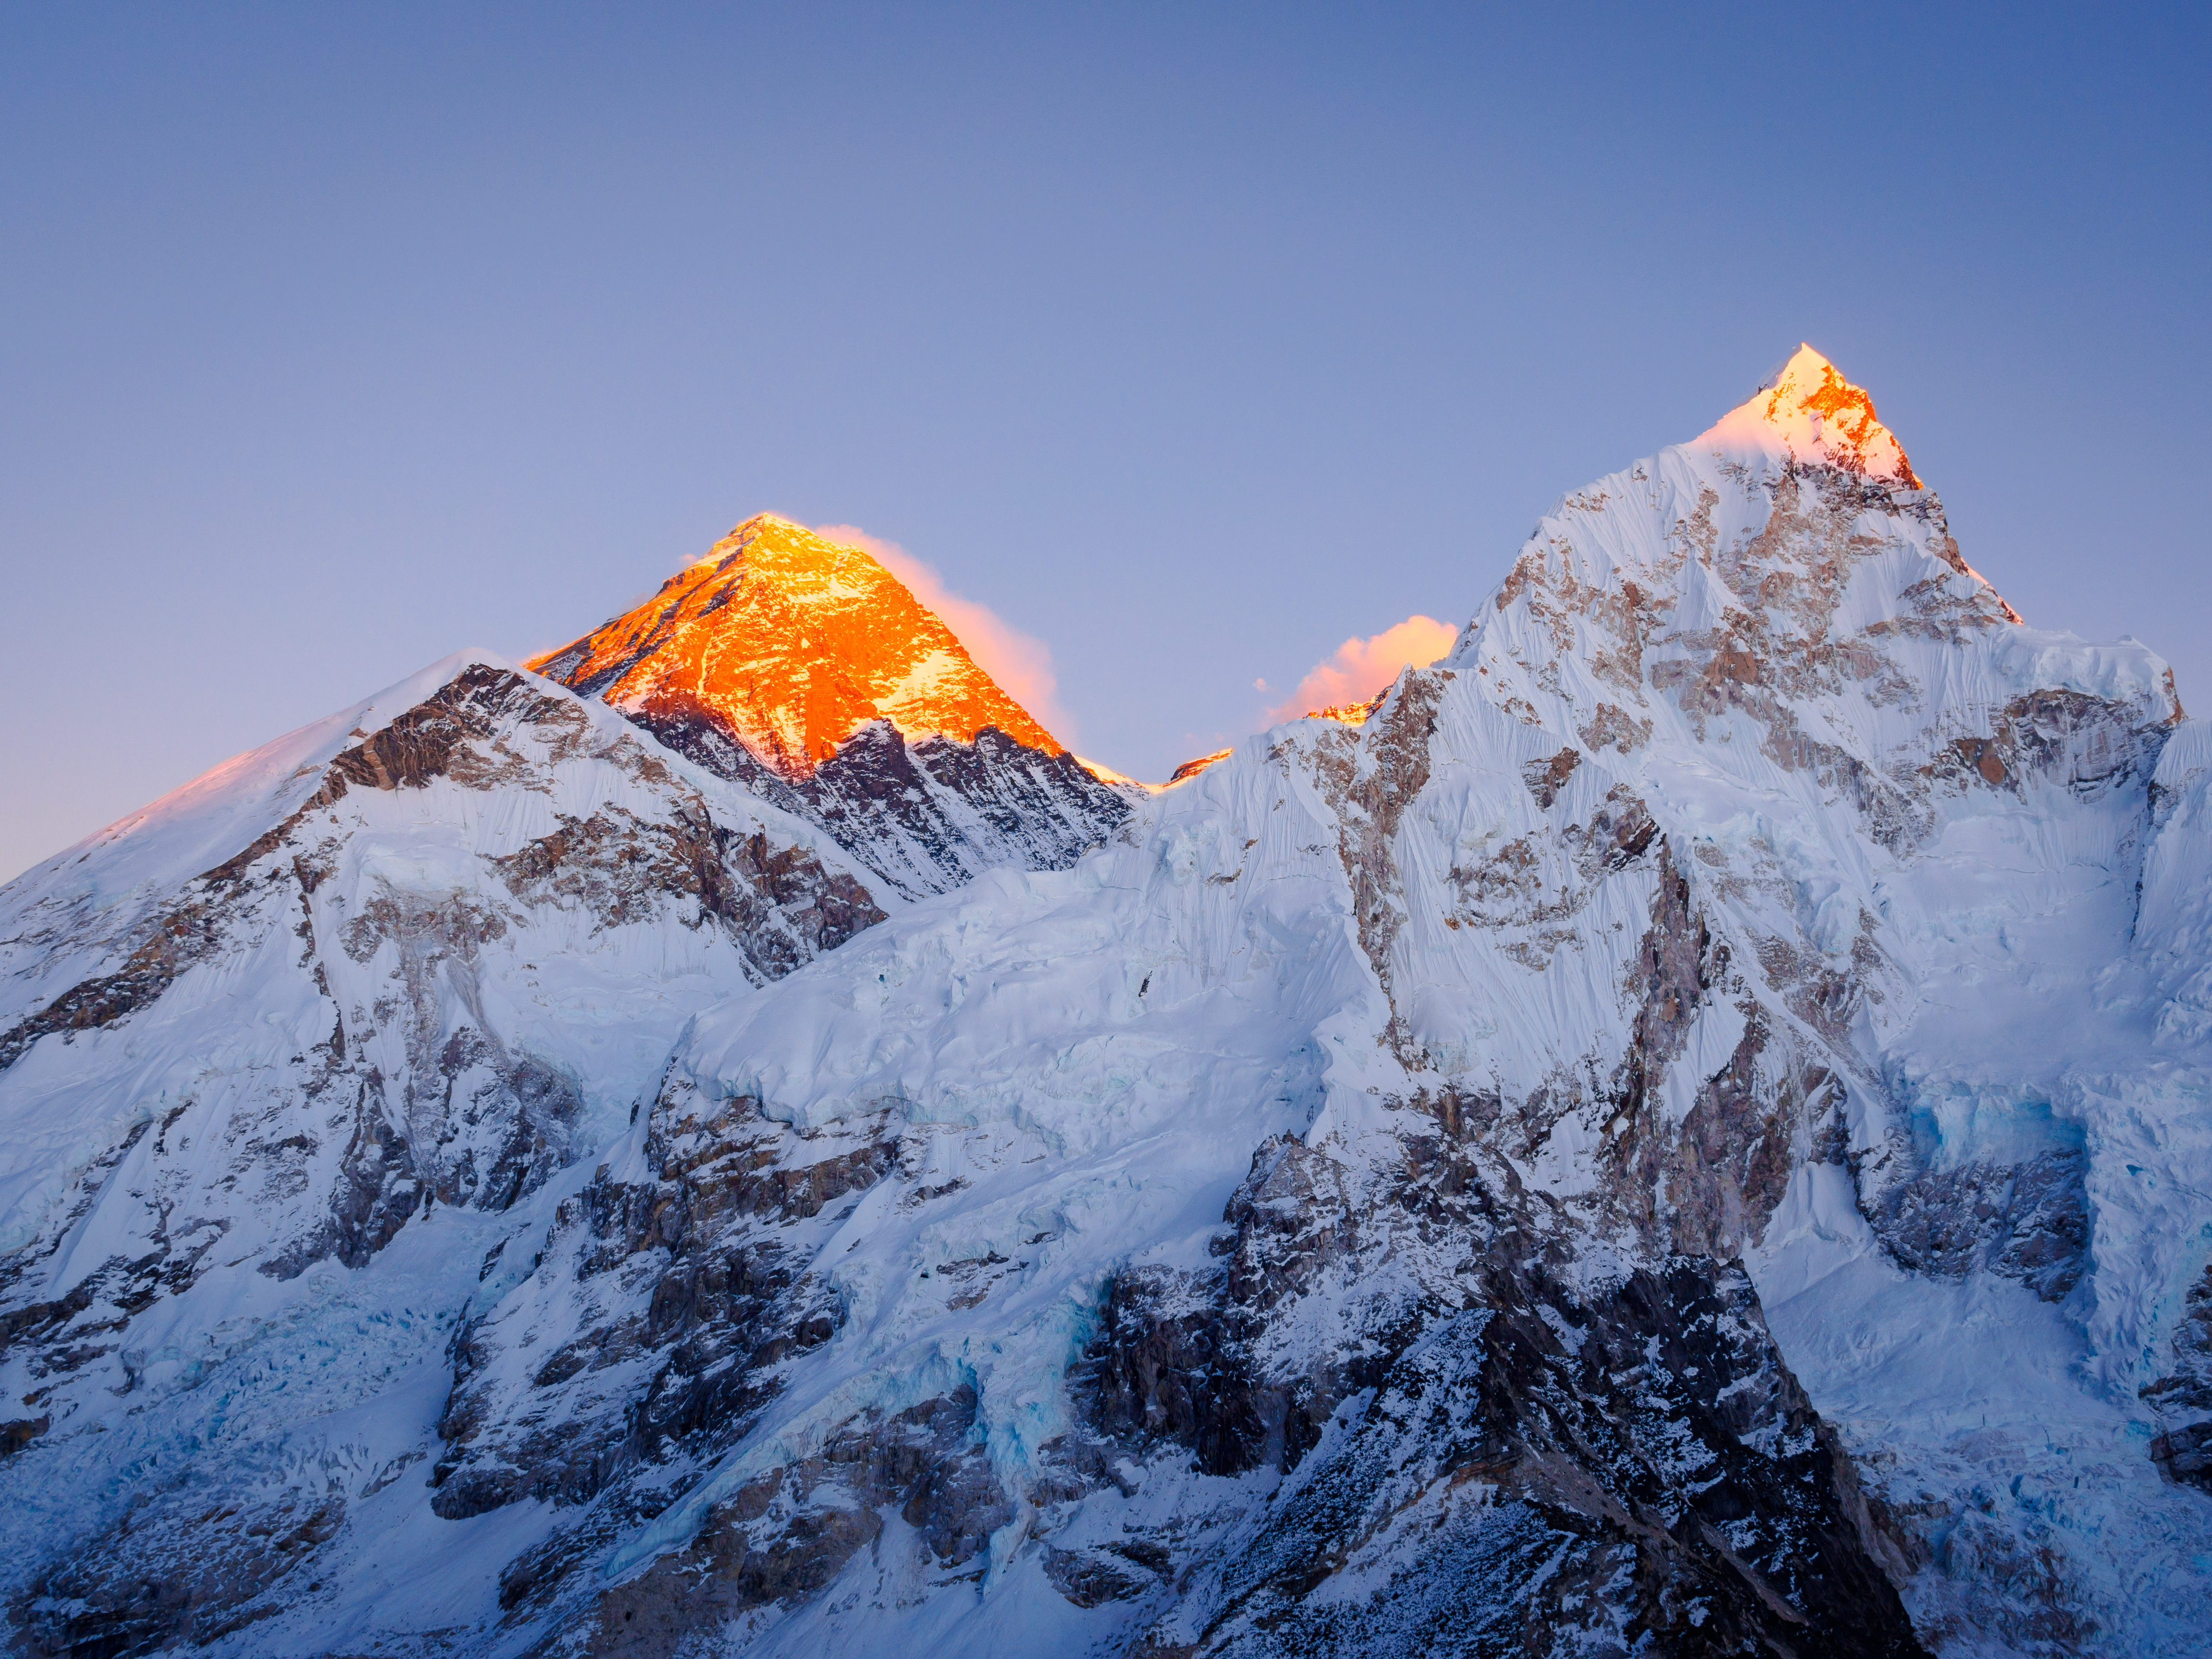 Last light on Mt Everest and Nuptse, Nepal (Whitworth Images—Getty Images/Moment RF)